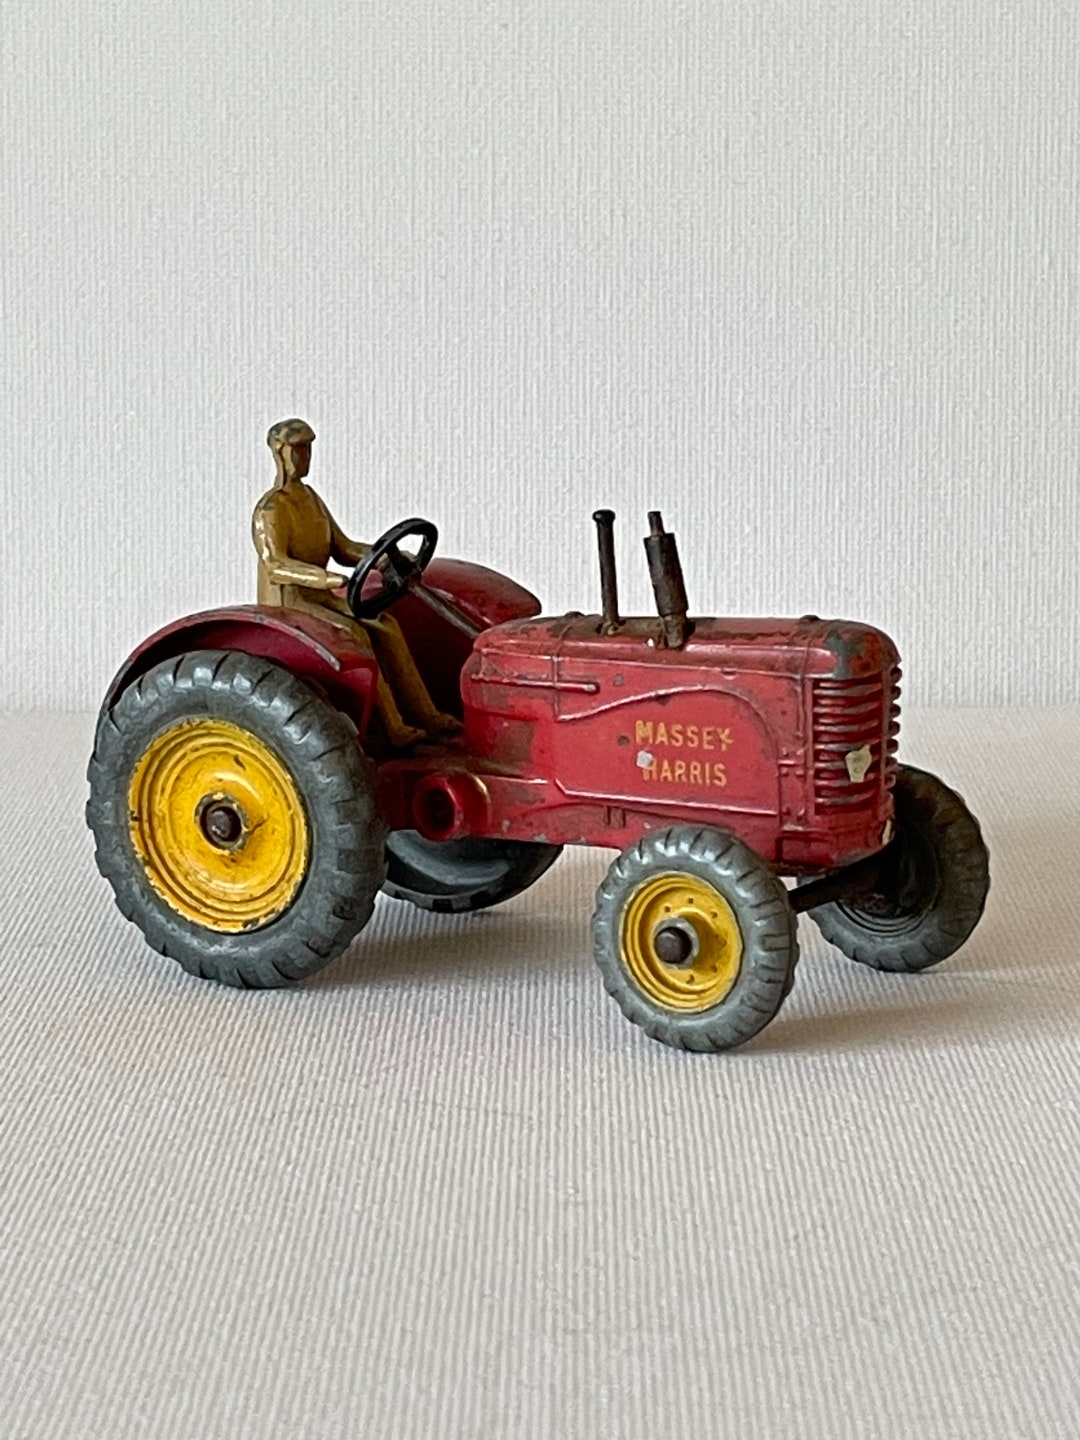 Antique Massey Harris Tractor Dinky Toys Made in GT Britain Super Rare ...